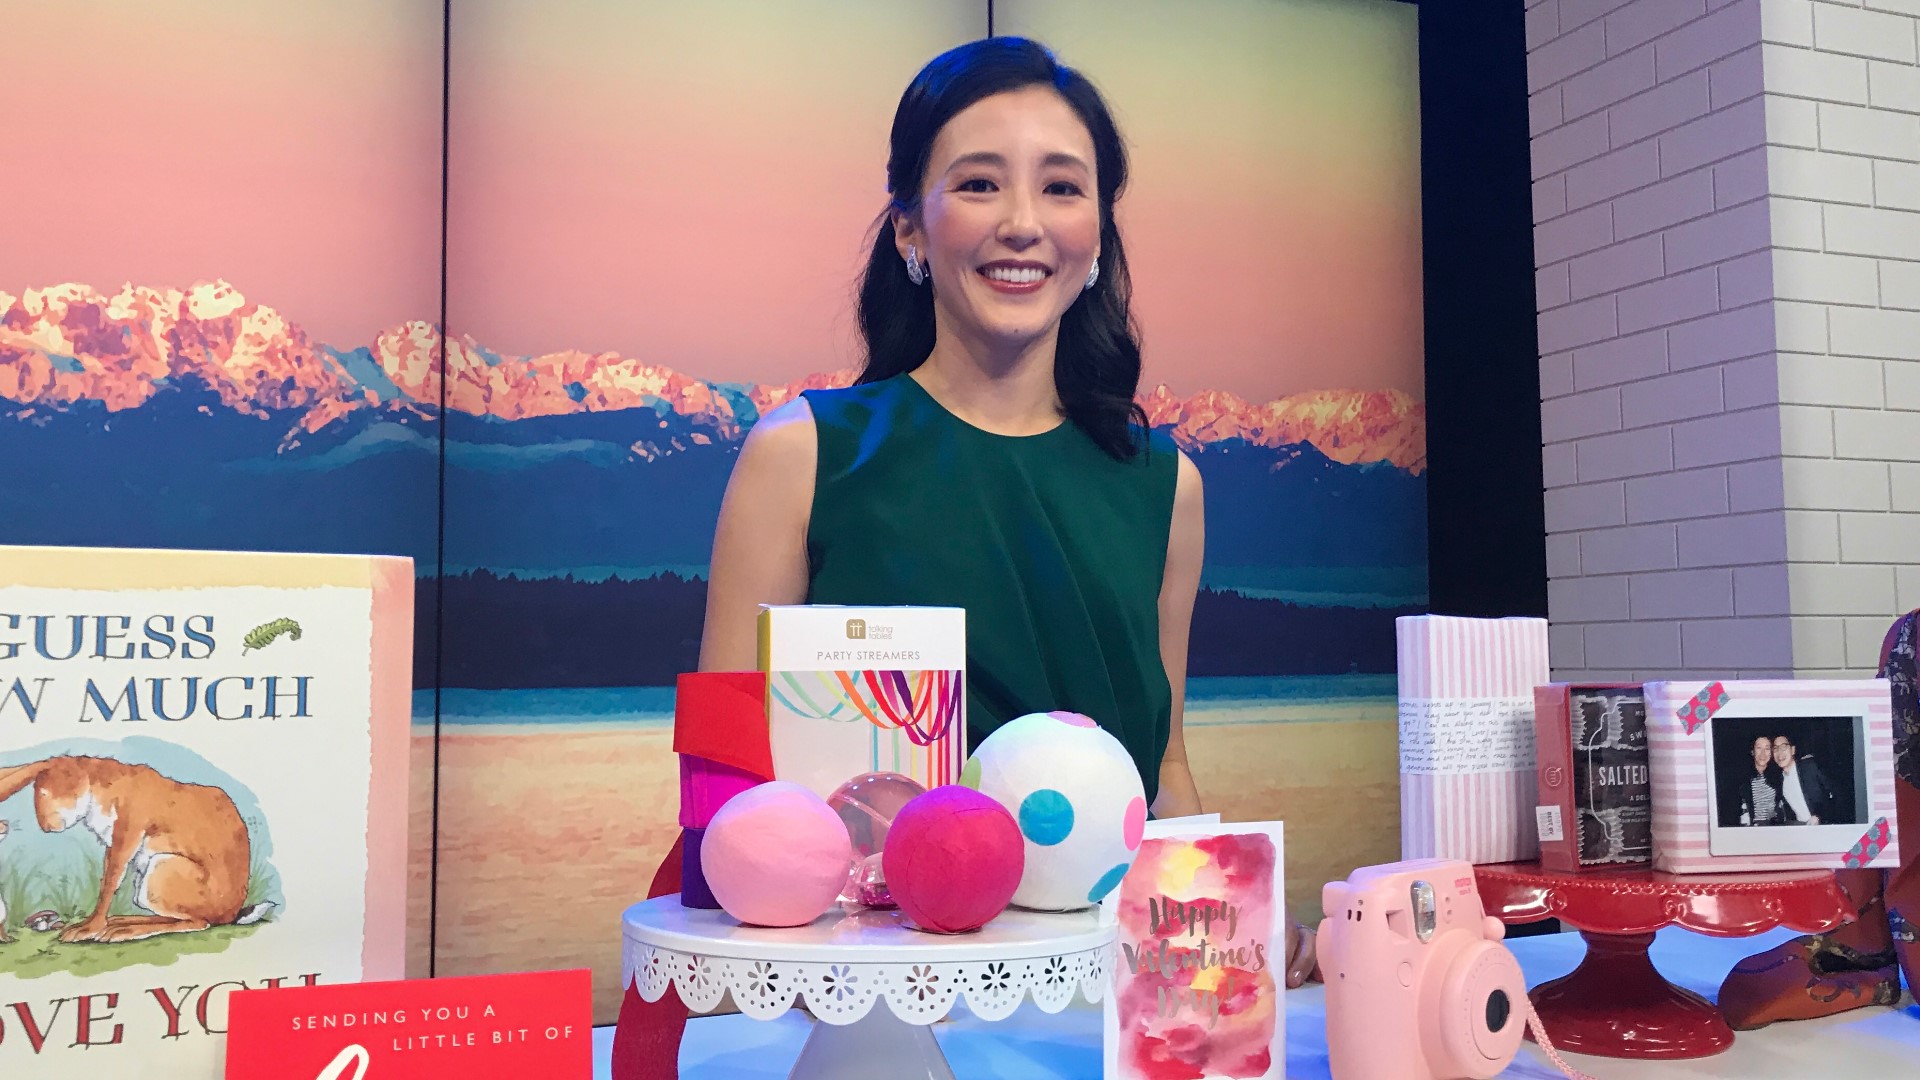 The Present Perfect's Jessica Zen shows us how to take your gift to the next level!